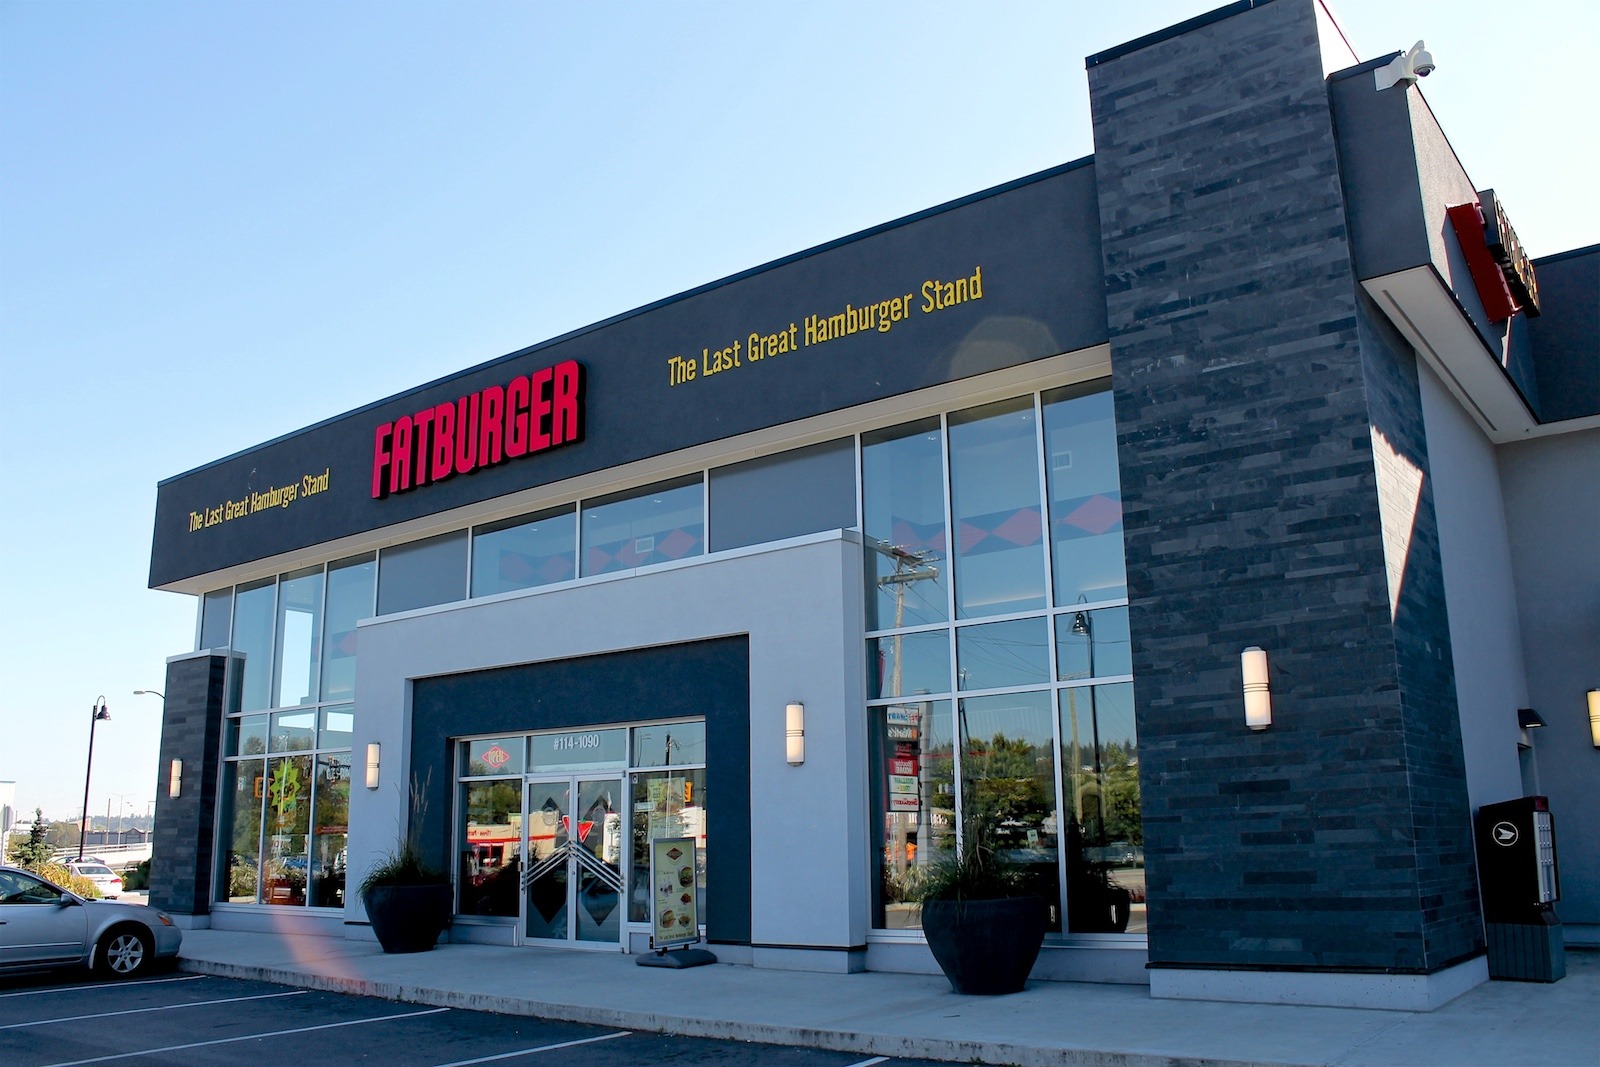 Robertson-Walls-Ceilings-Completed-Projects-RestaurantsHospitality-Rickys-Bar-GrillFatburger-10 Completed Projects